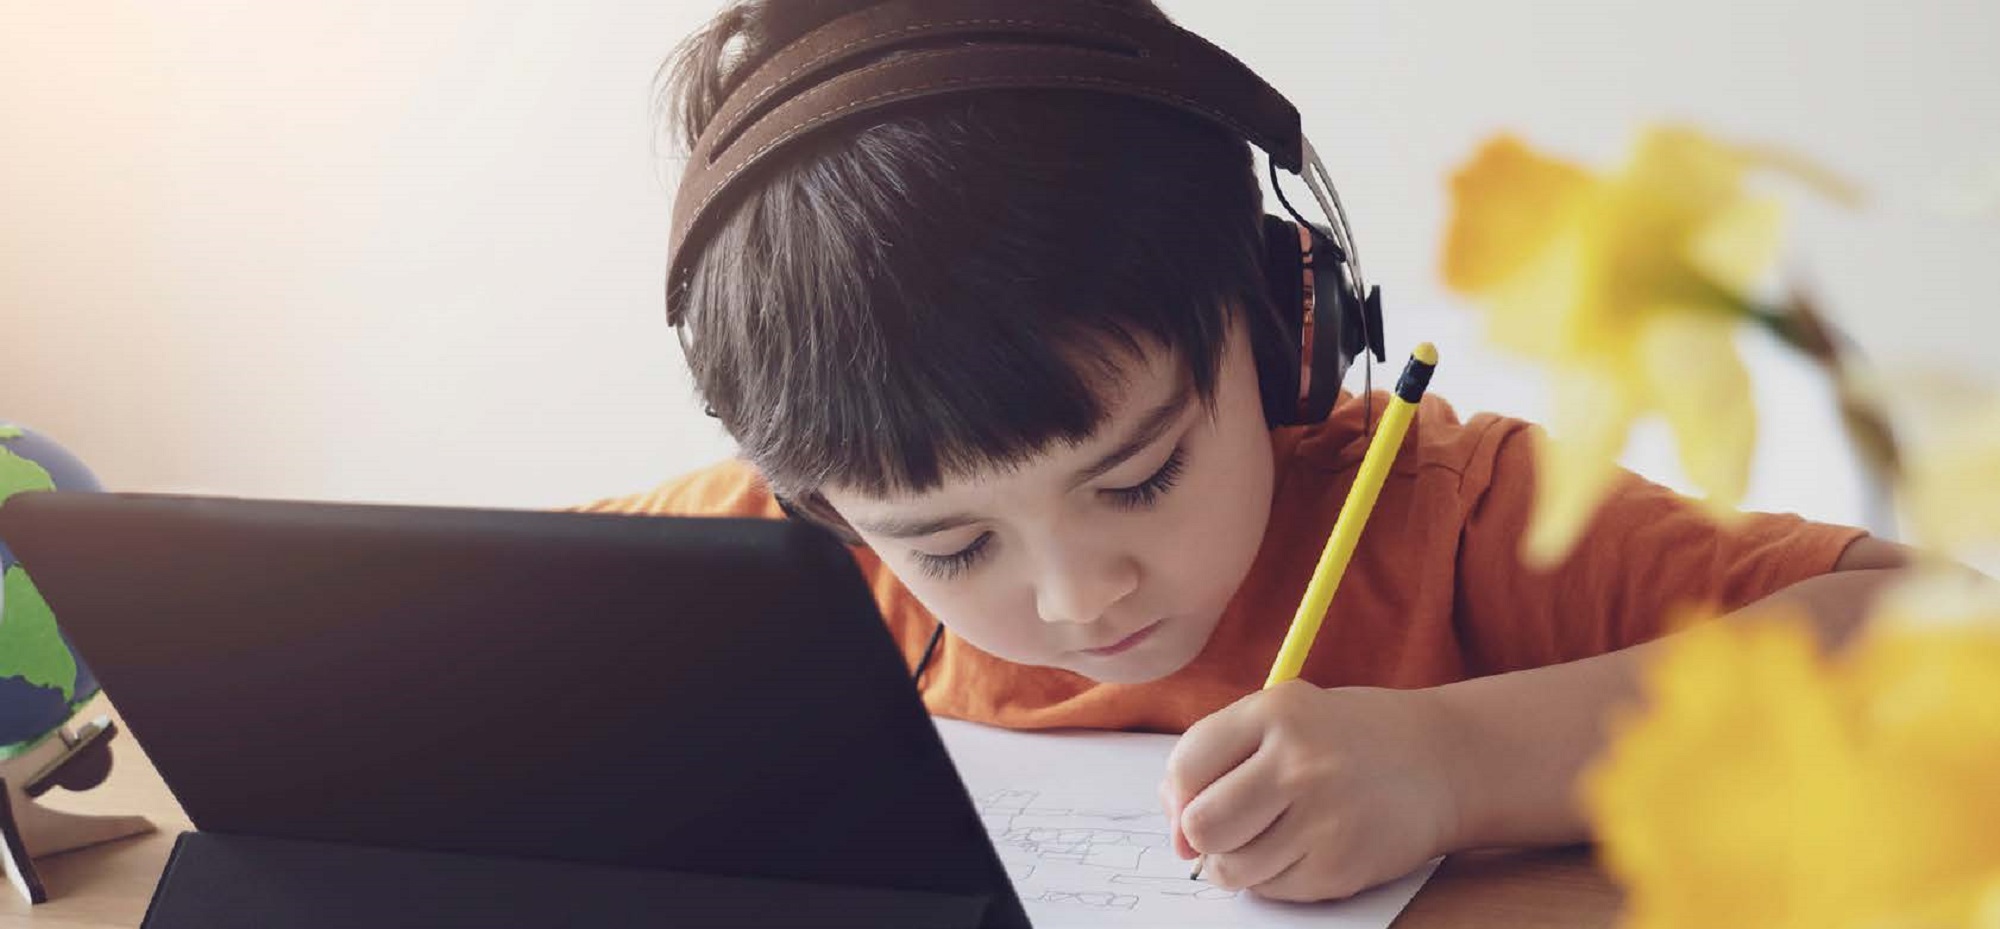 young boy in front of a tablet with headphones on writing with a pencil